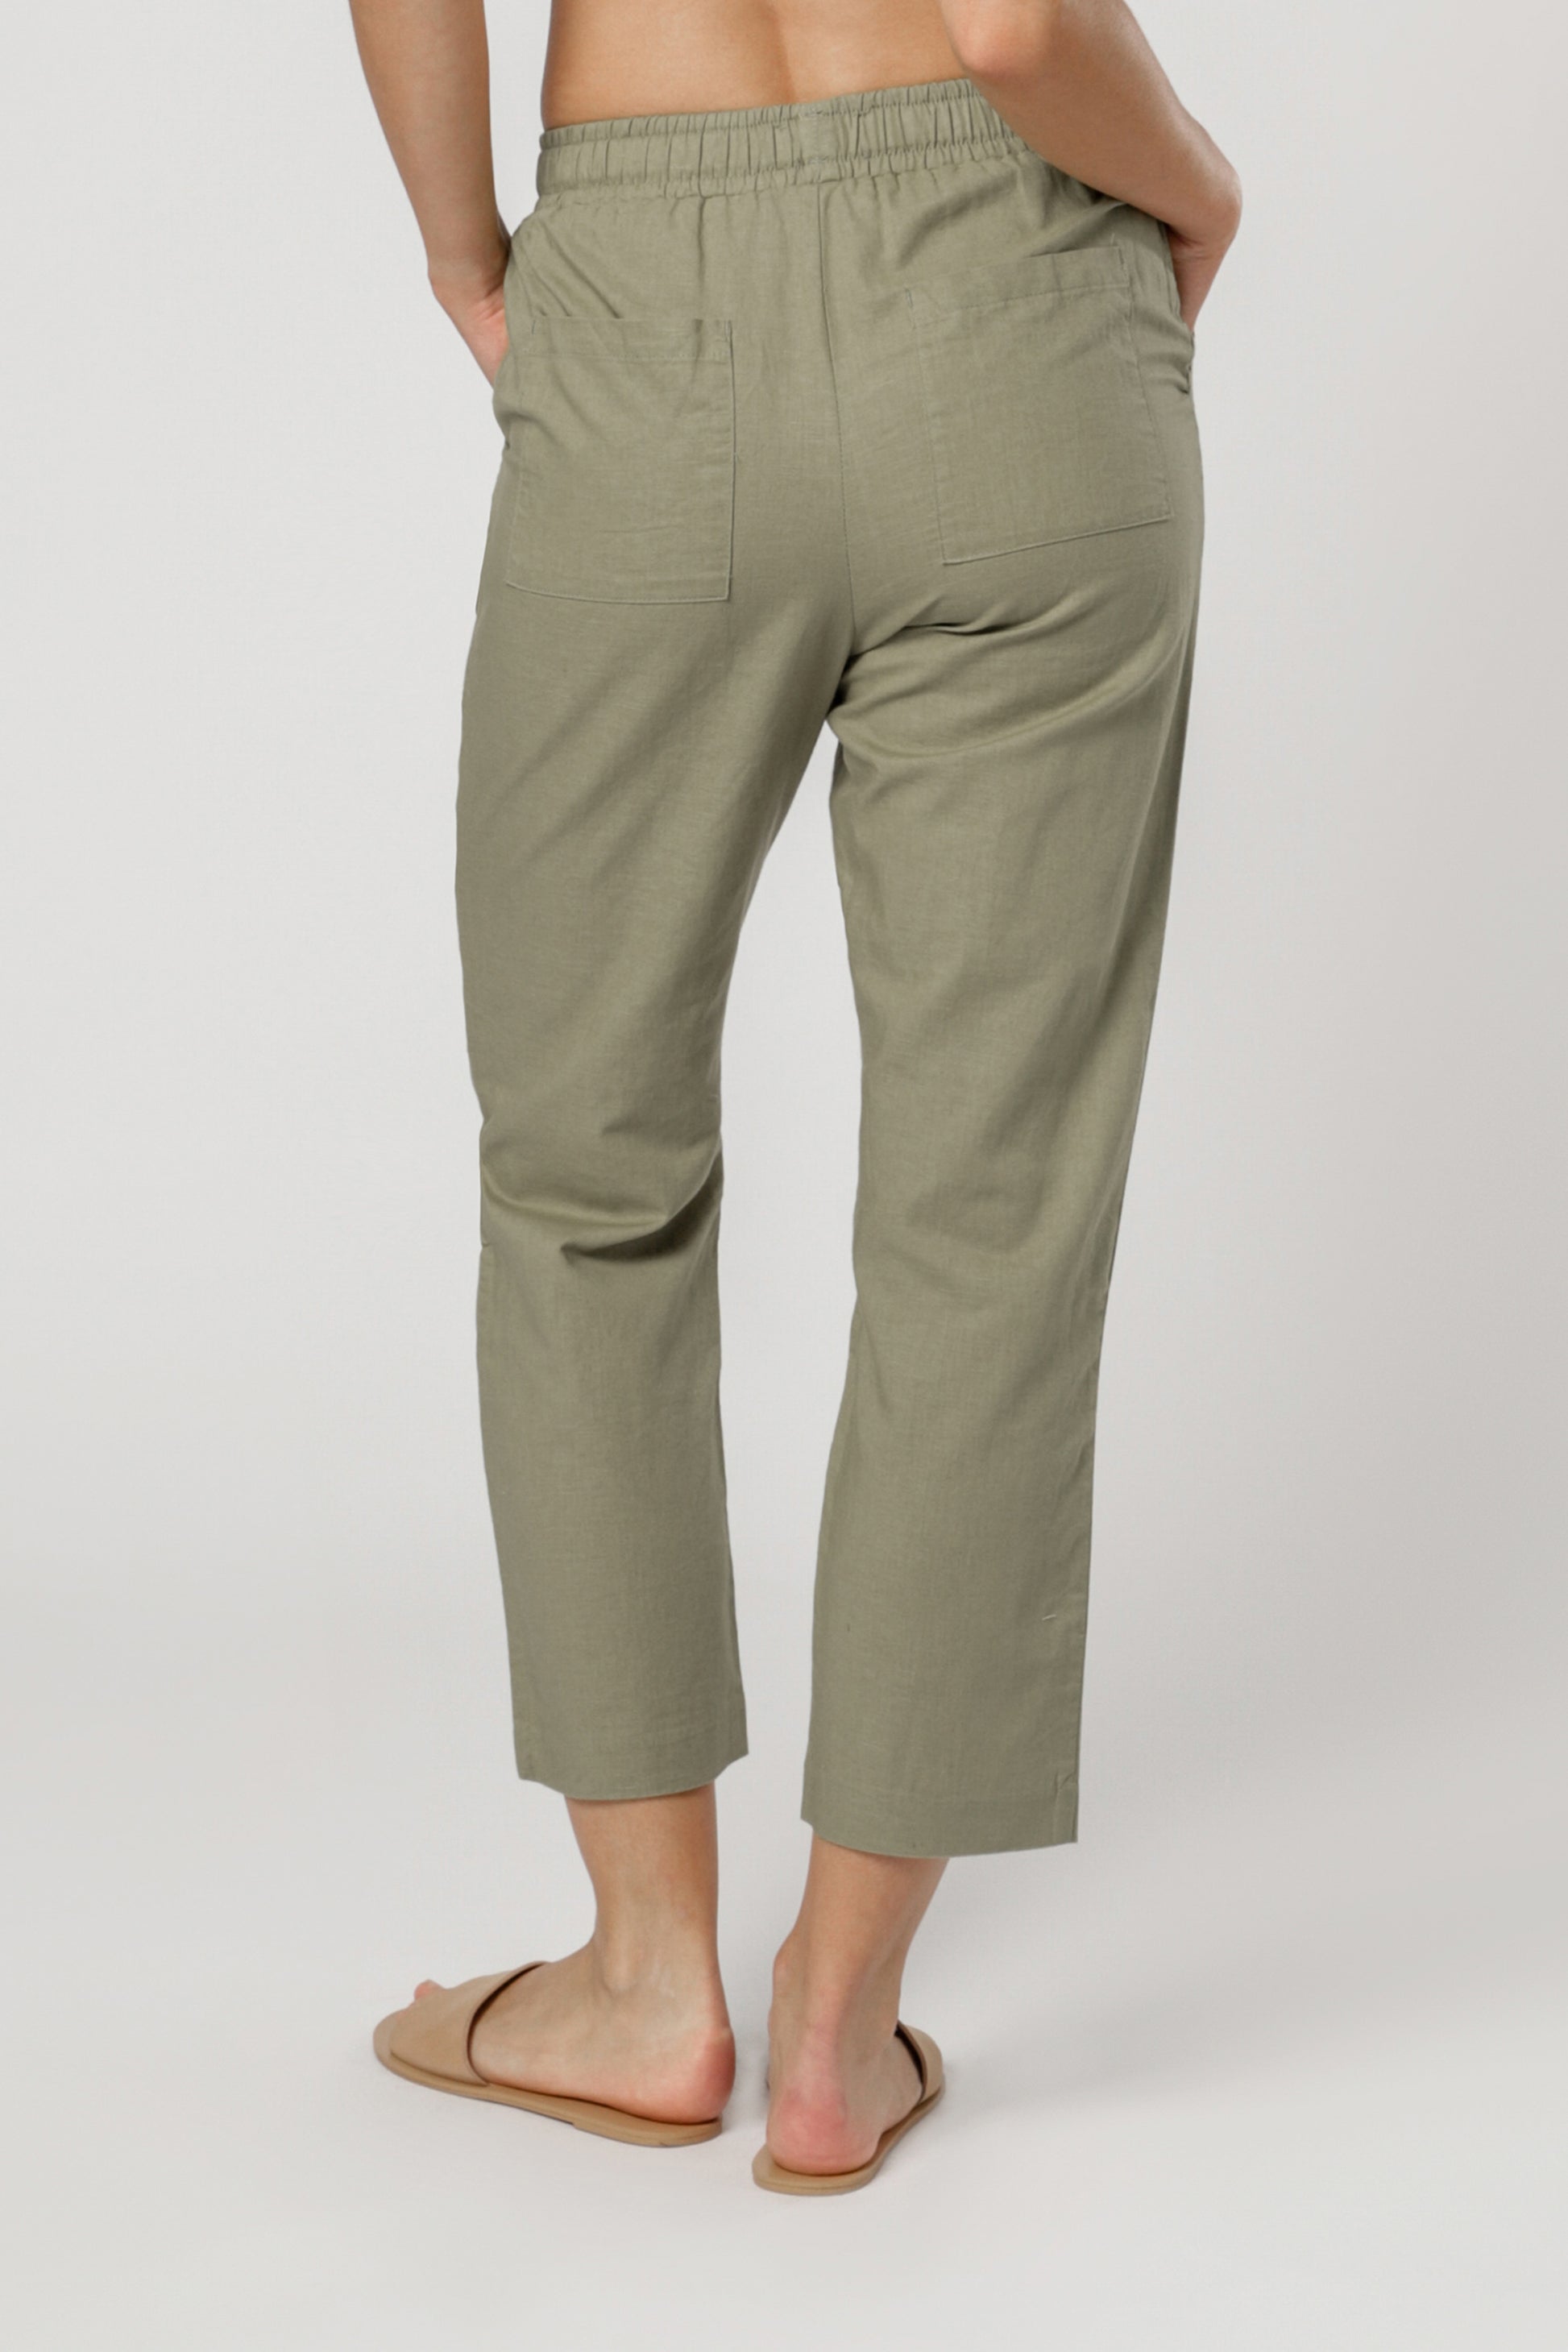 Nude Lucy Nude Classic Pant Moss Pants 